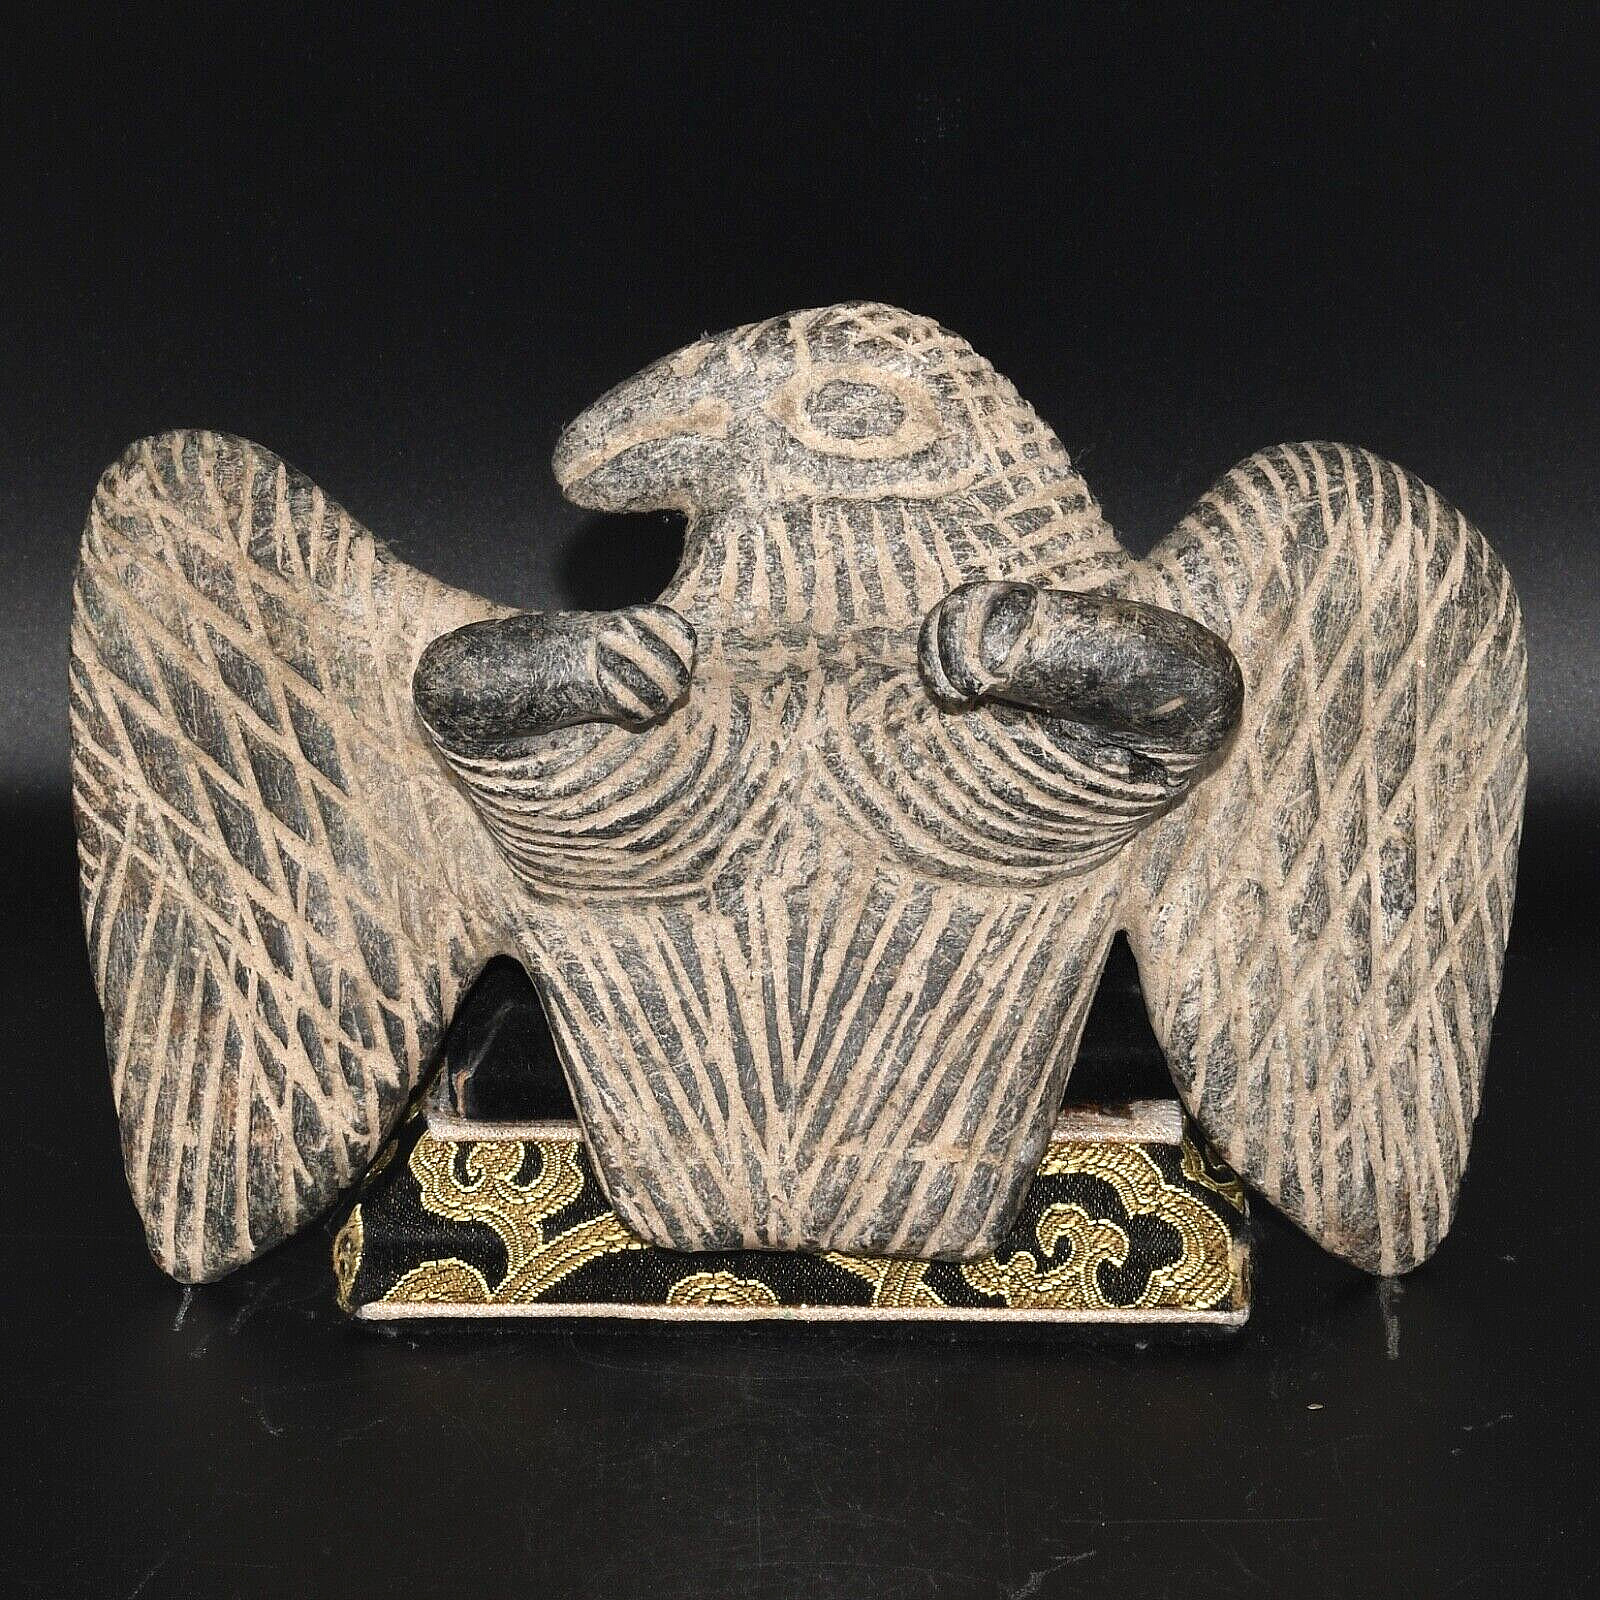 Very Large Ancient Bactrian Stone Eagle Bird Sculpture Figurine C. 2000-1500 BC